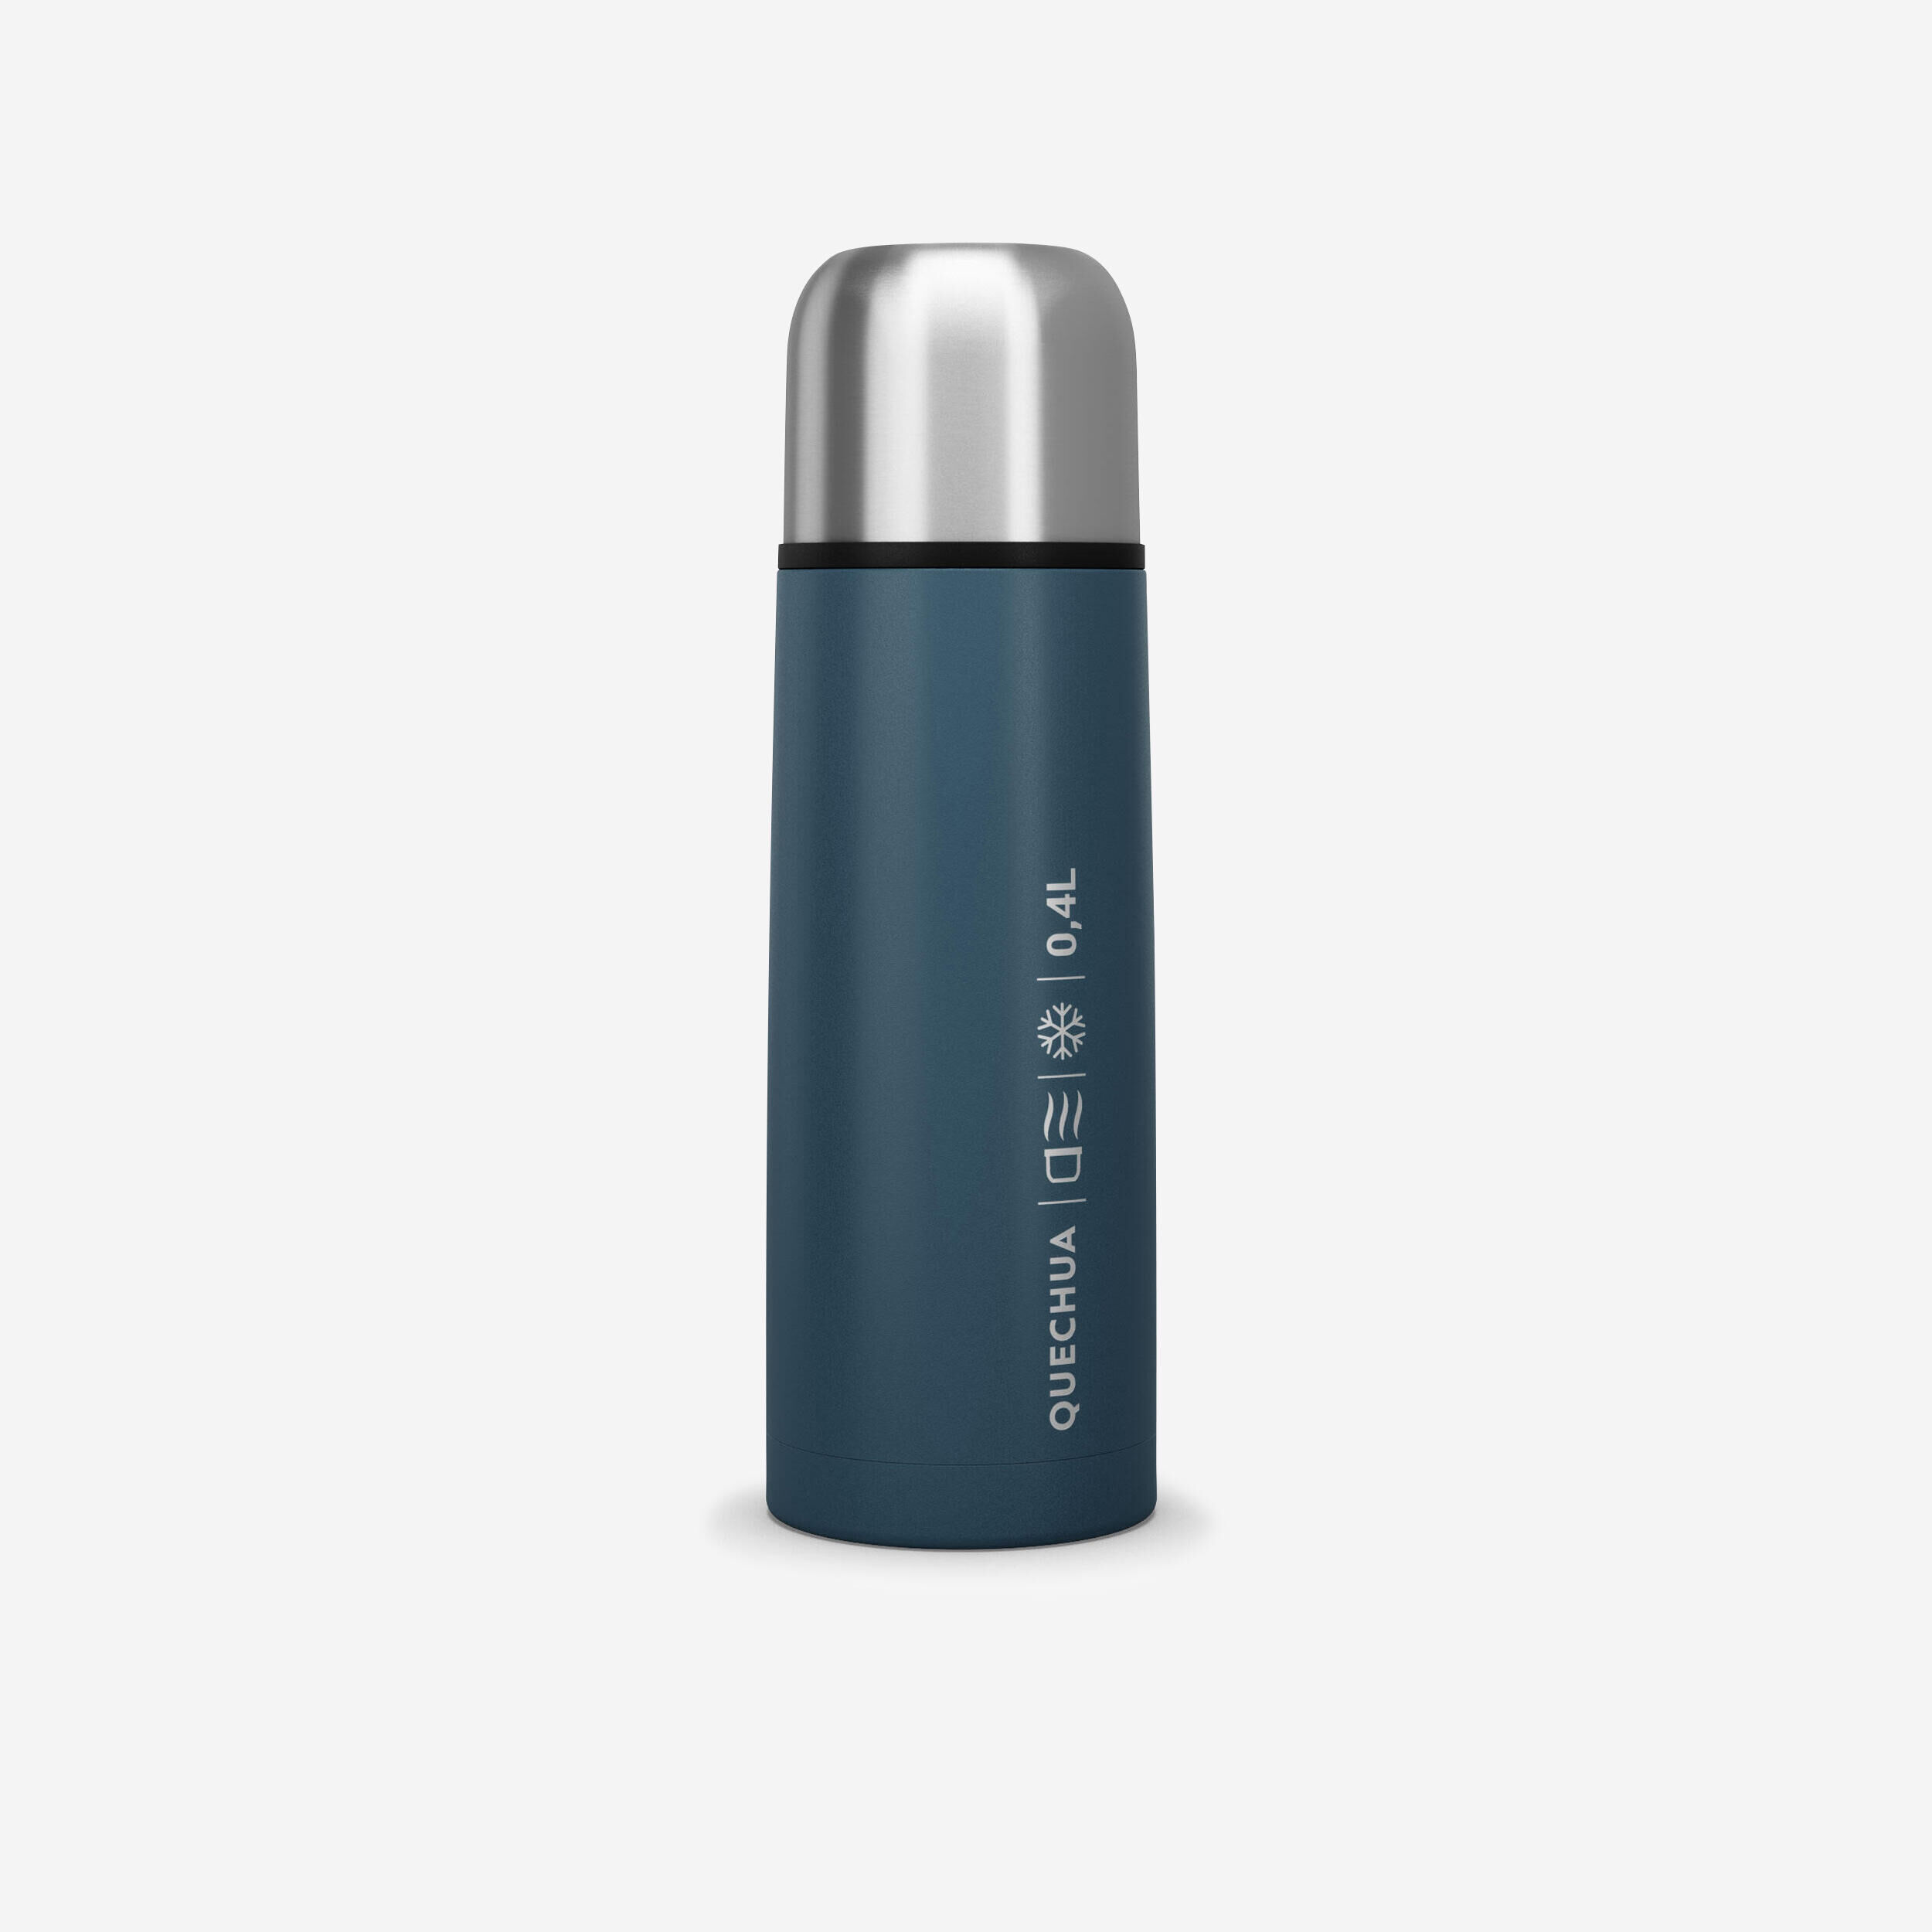 QUECHUA 0.4 L Stainless Steel Isothermal Flask with Cup for Hiking - Blue